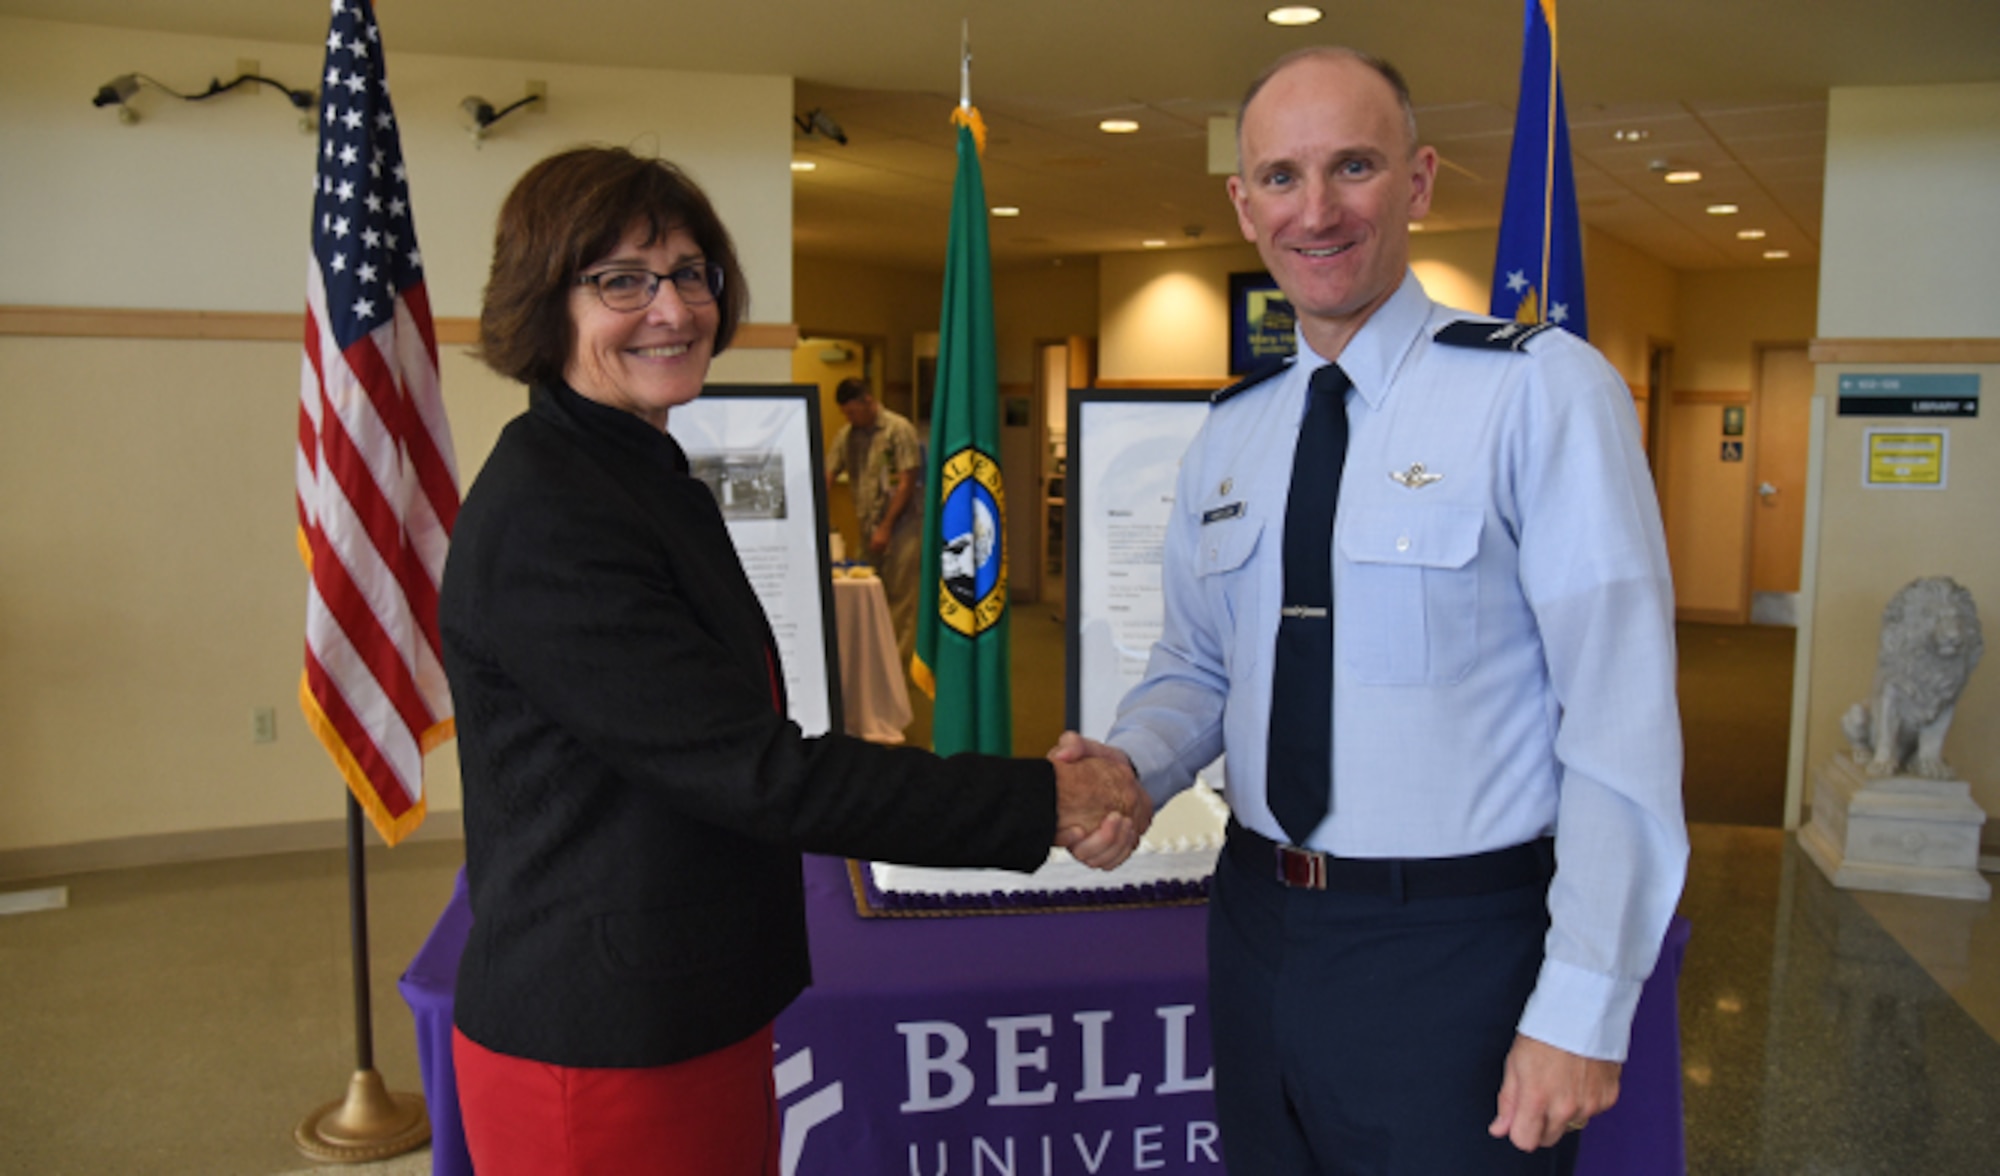 Col. Ryan Samuelson, 92nd Air Refueling Wing commander, and Dr. Mary Hawkins, Bellevue University president, celebrate the opening of Bellevue University at the Fairchild Education Center during the ribbon-cutting ceremony Aug. 25, 2016, at Fairchild Air Force Base. Bellevue University will offer three of its most popular graduate programs at Fairchild: Master of Science in Human Resource Management, Master of Business Administration and Master of Science in Cybersecurity. (U.S. Air Force photo/Airman 1st Class Mackenzie Richardson)